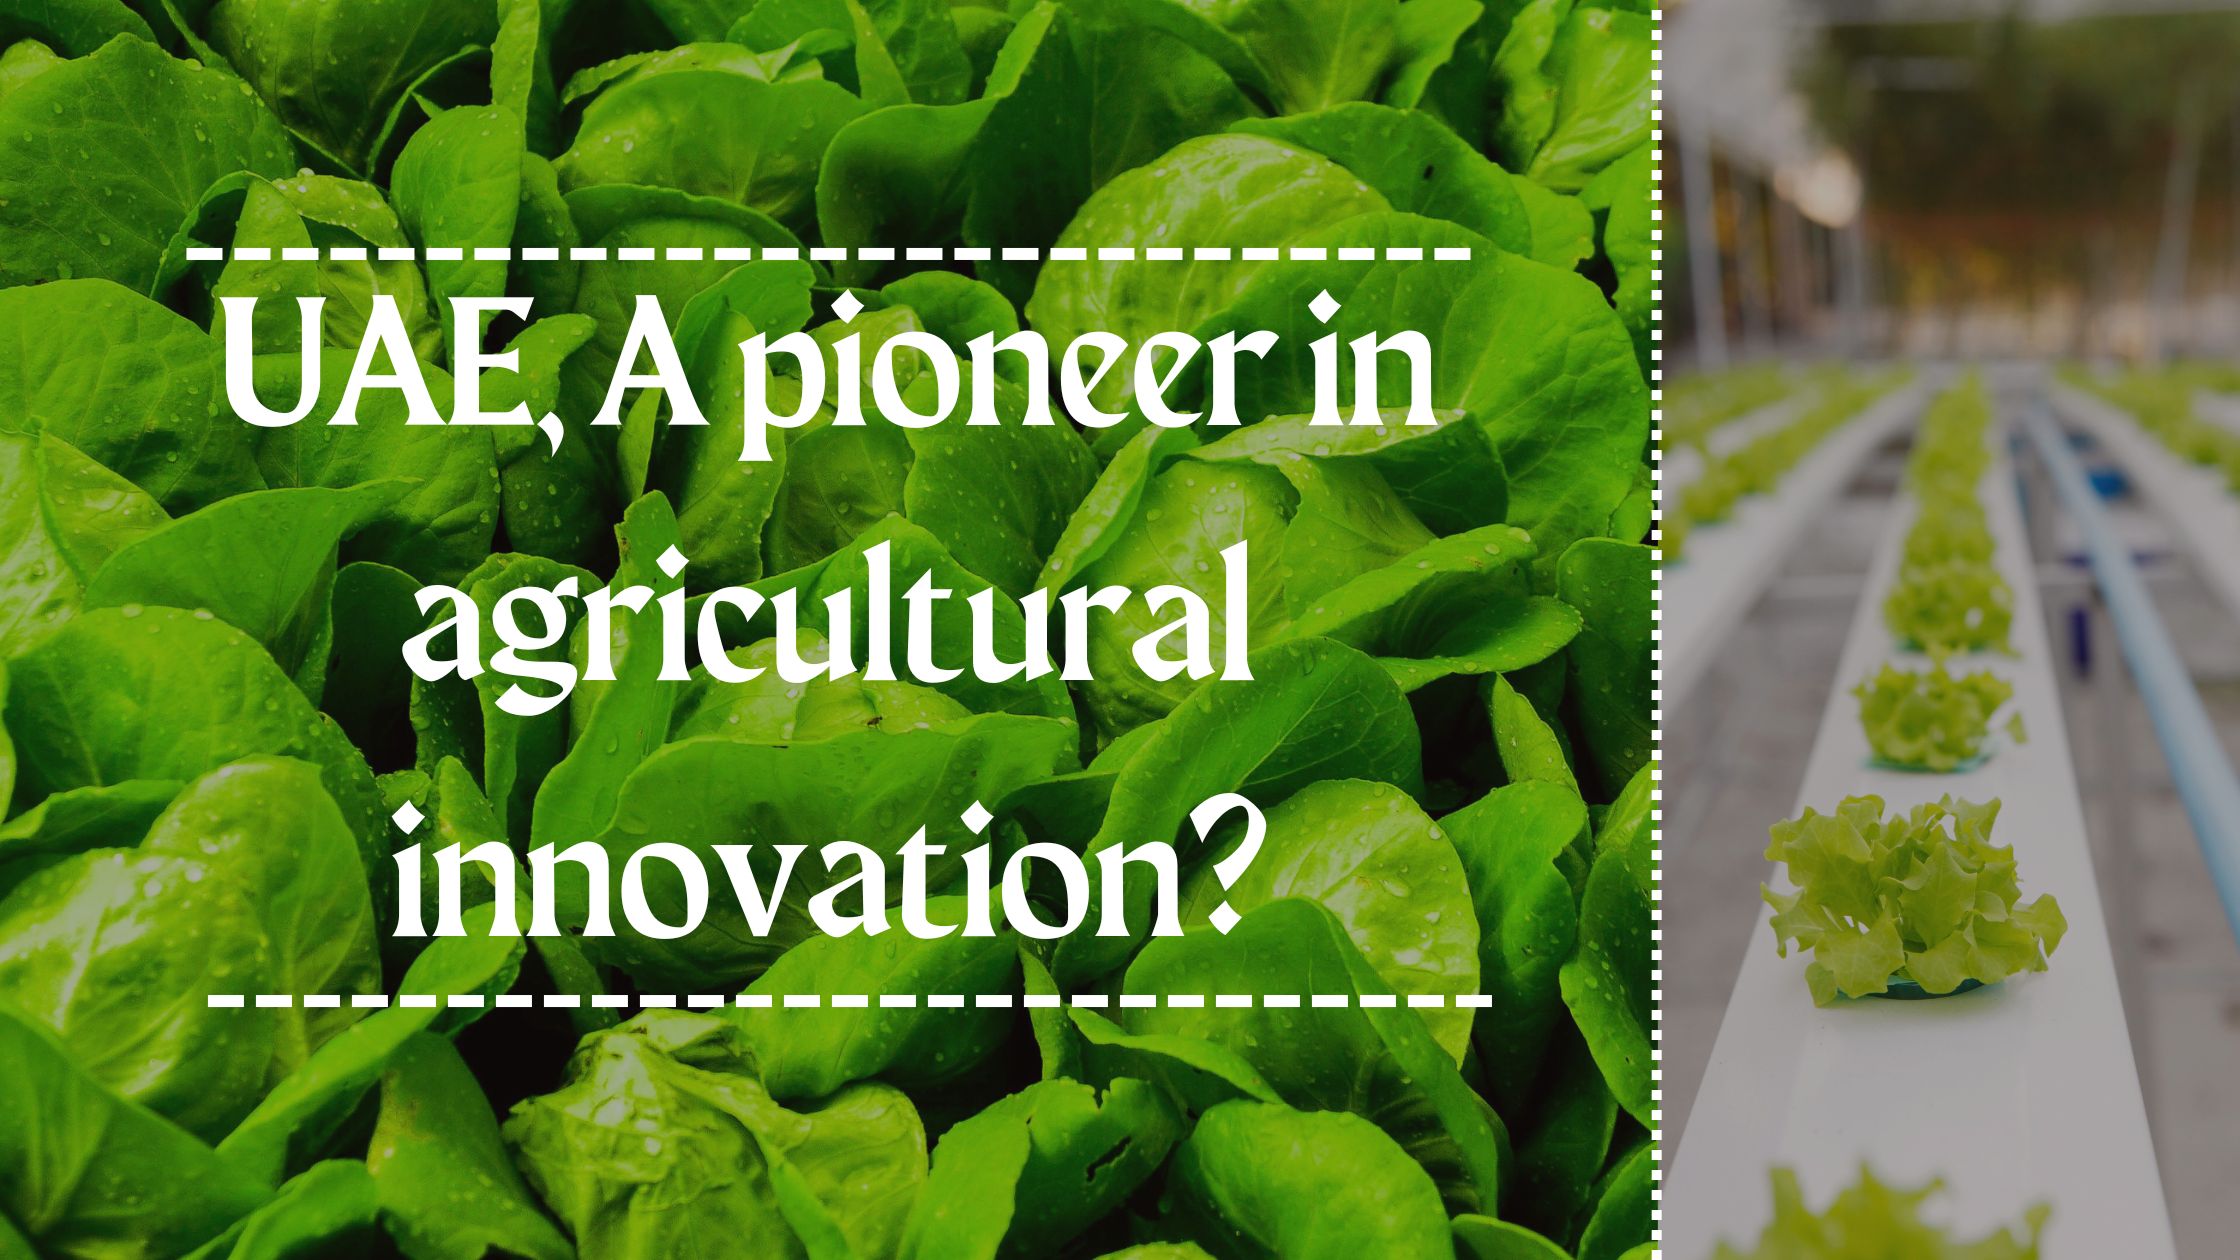 UAE, A pioneer in agricultural innovation?